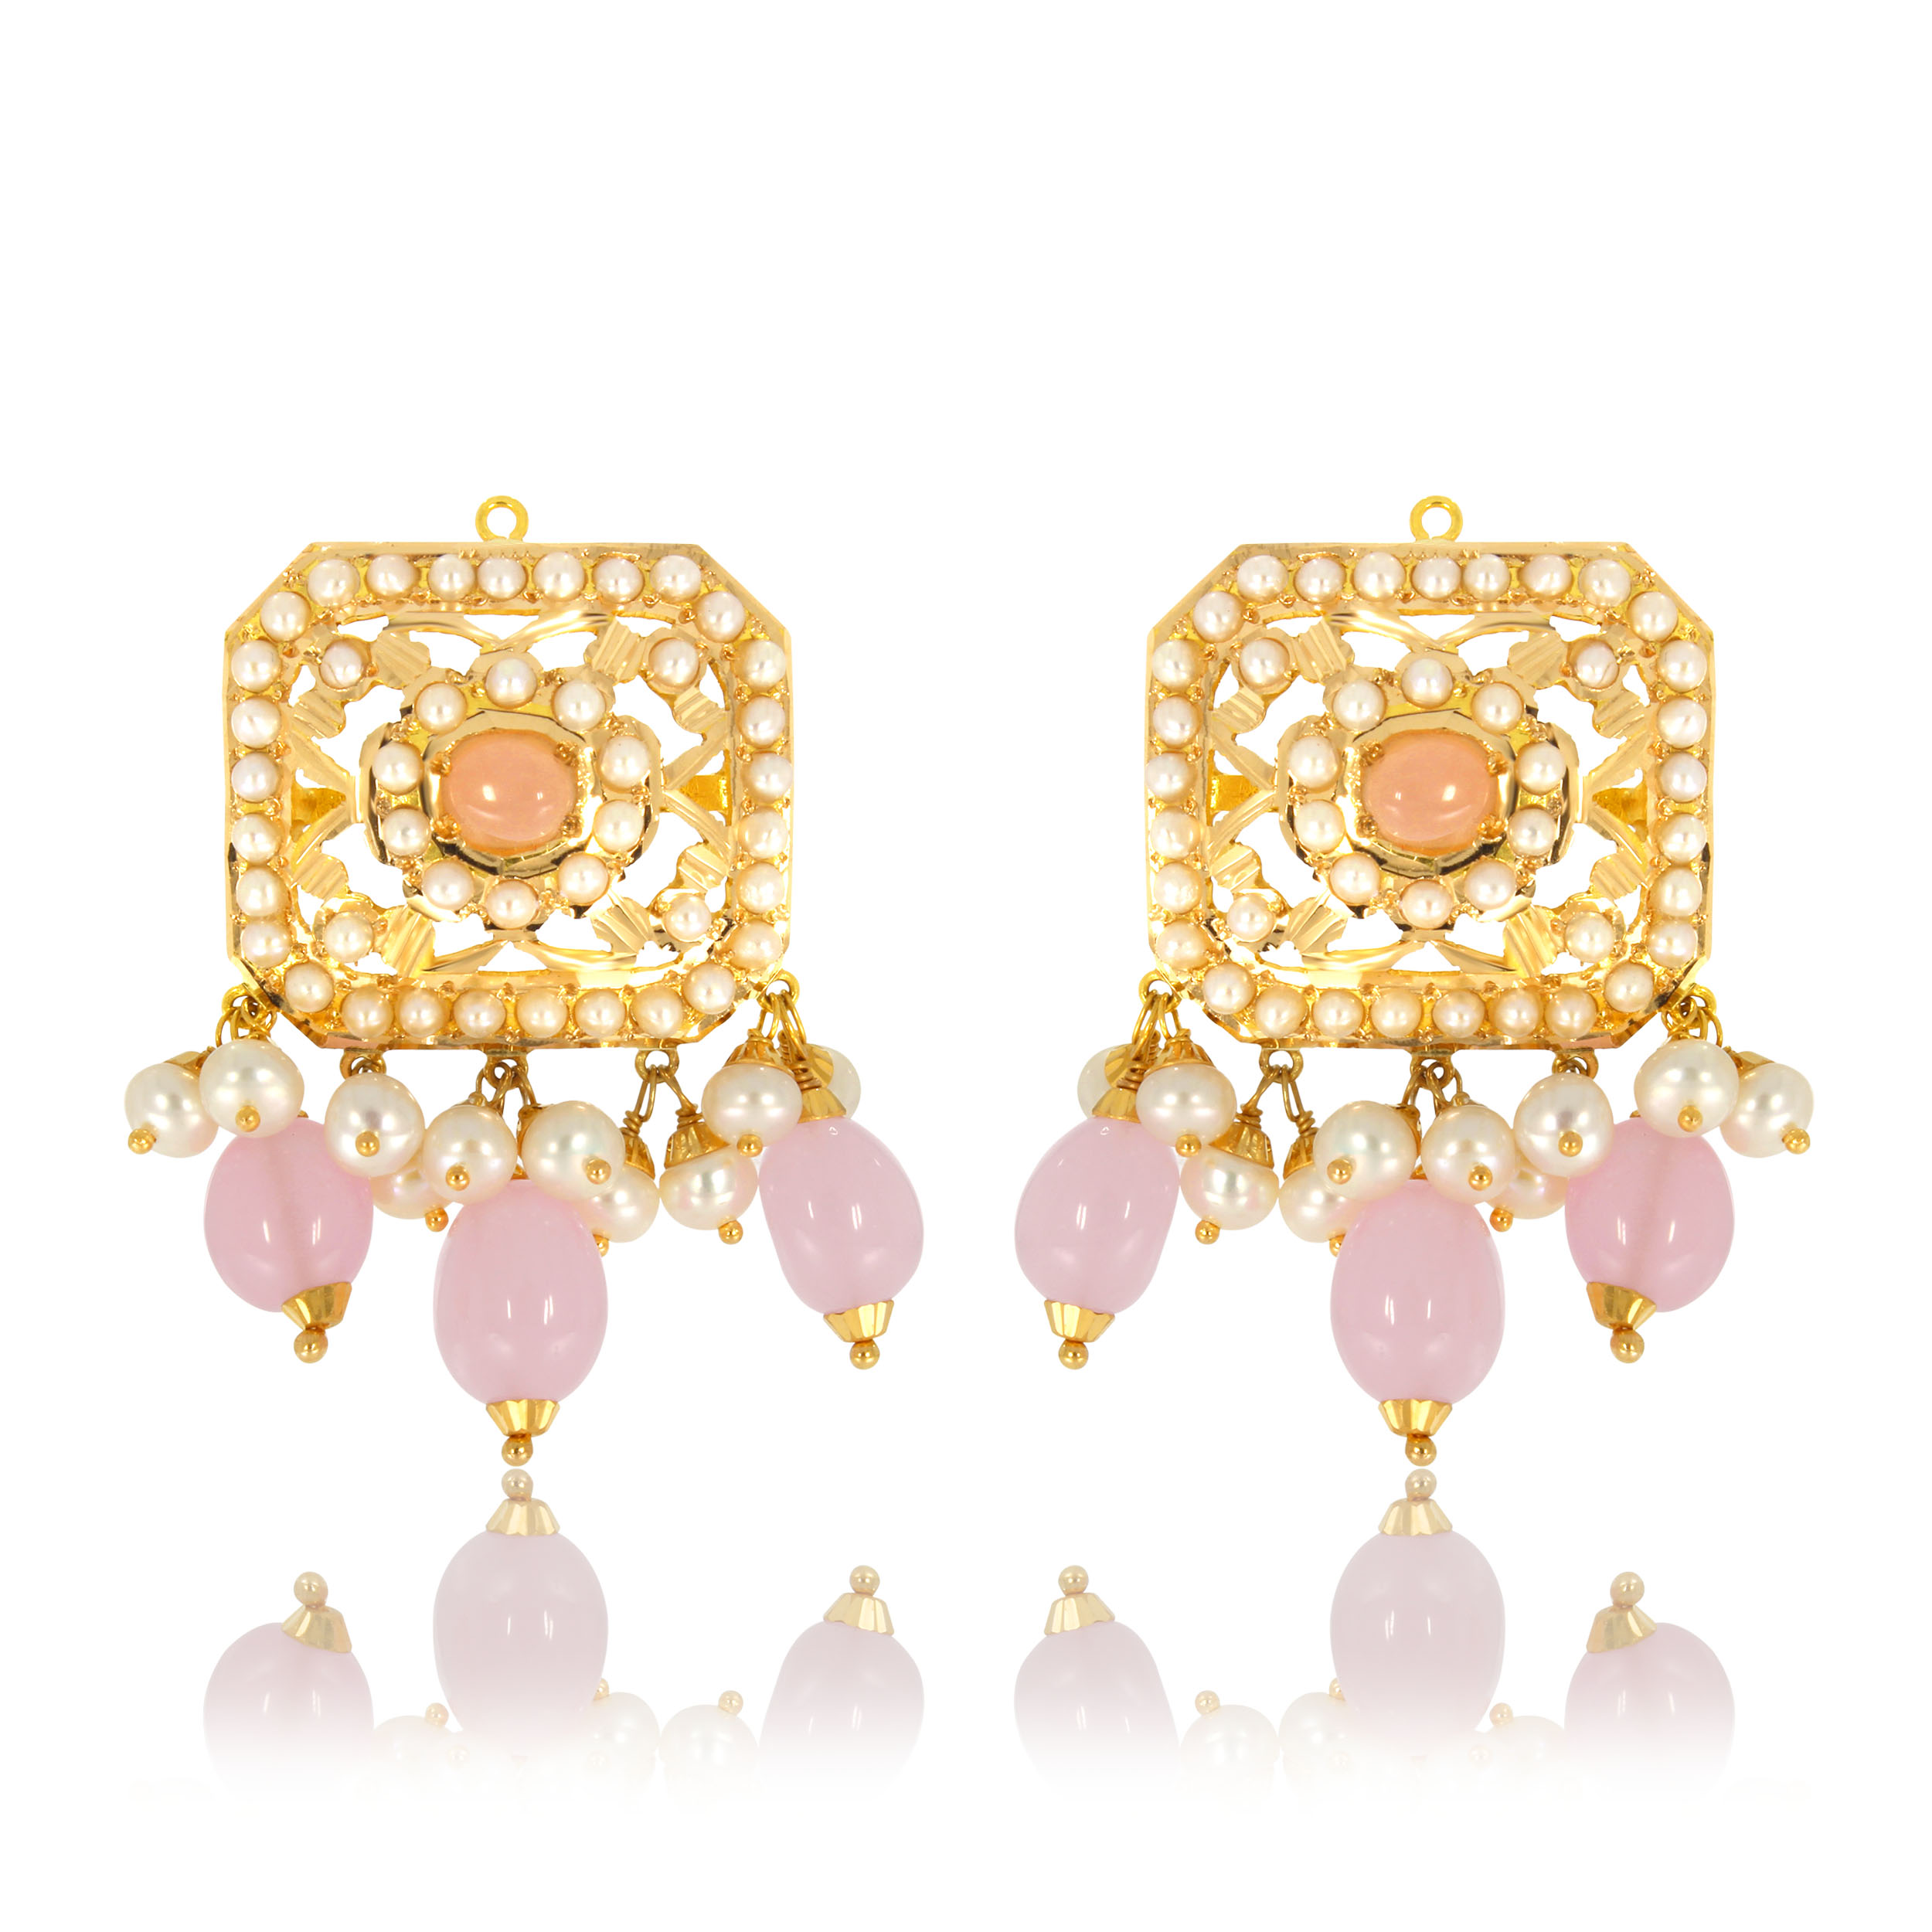 SOL AABI JEWELS 22CT  BIS HALLMARK GOLD GEMSTONE EARRINGS FOR  W